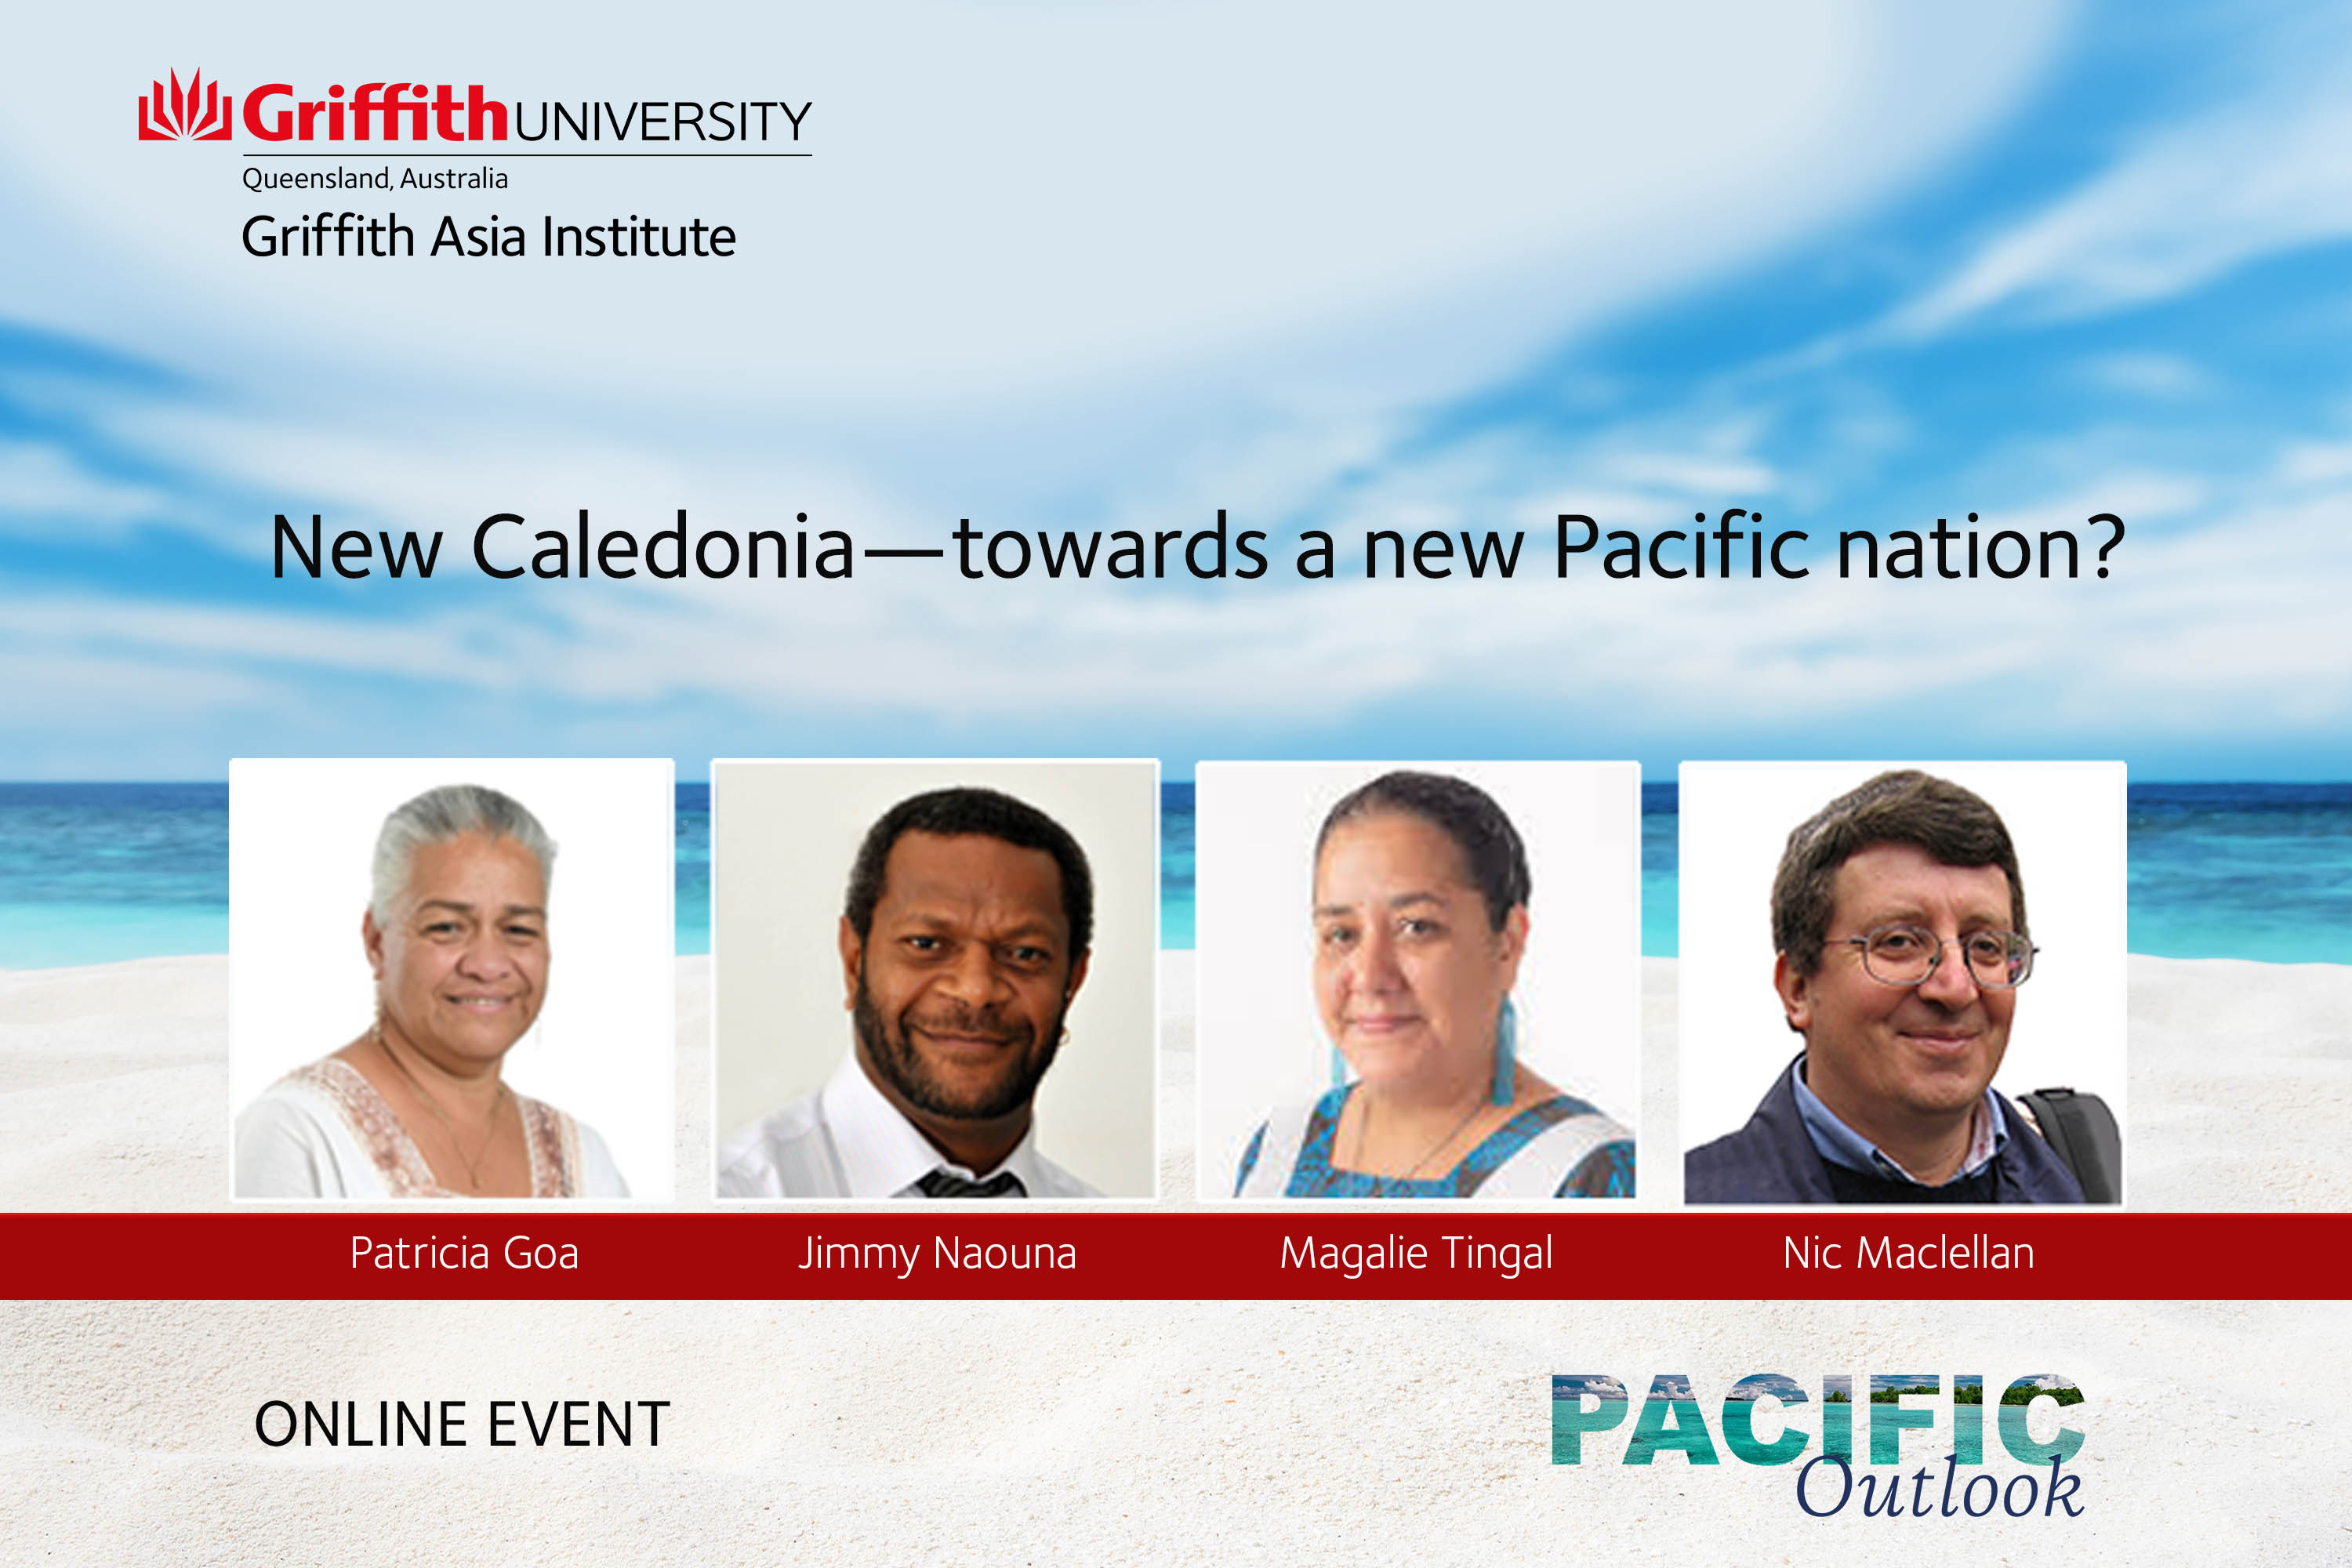 New Caledonia - towards a new Pacific nation?